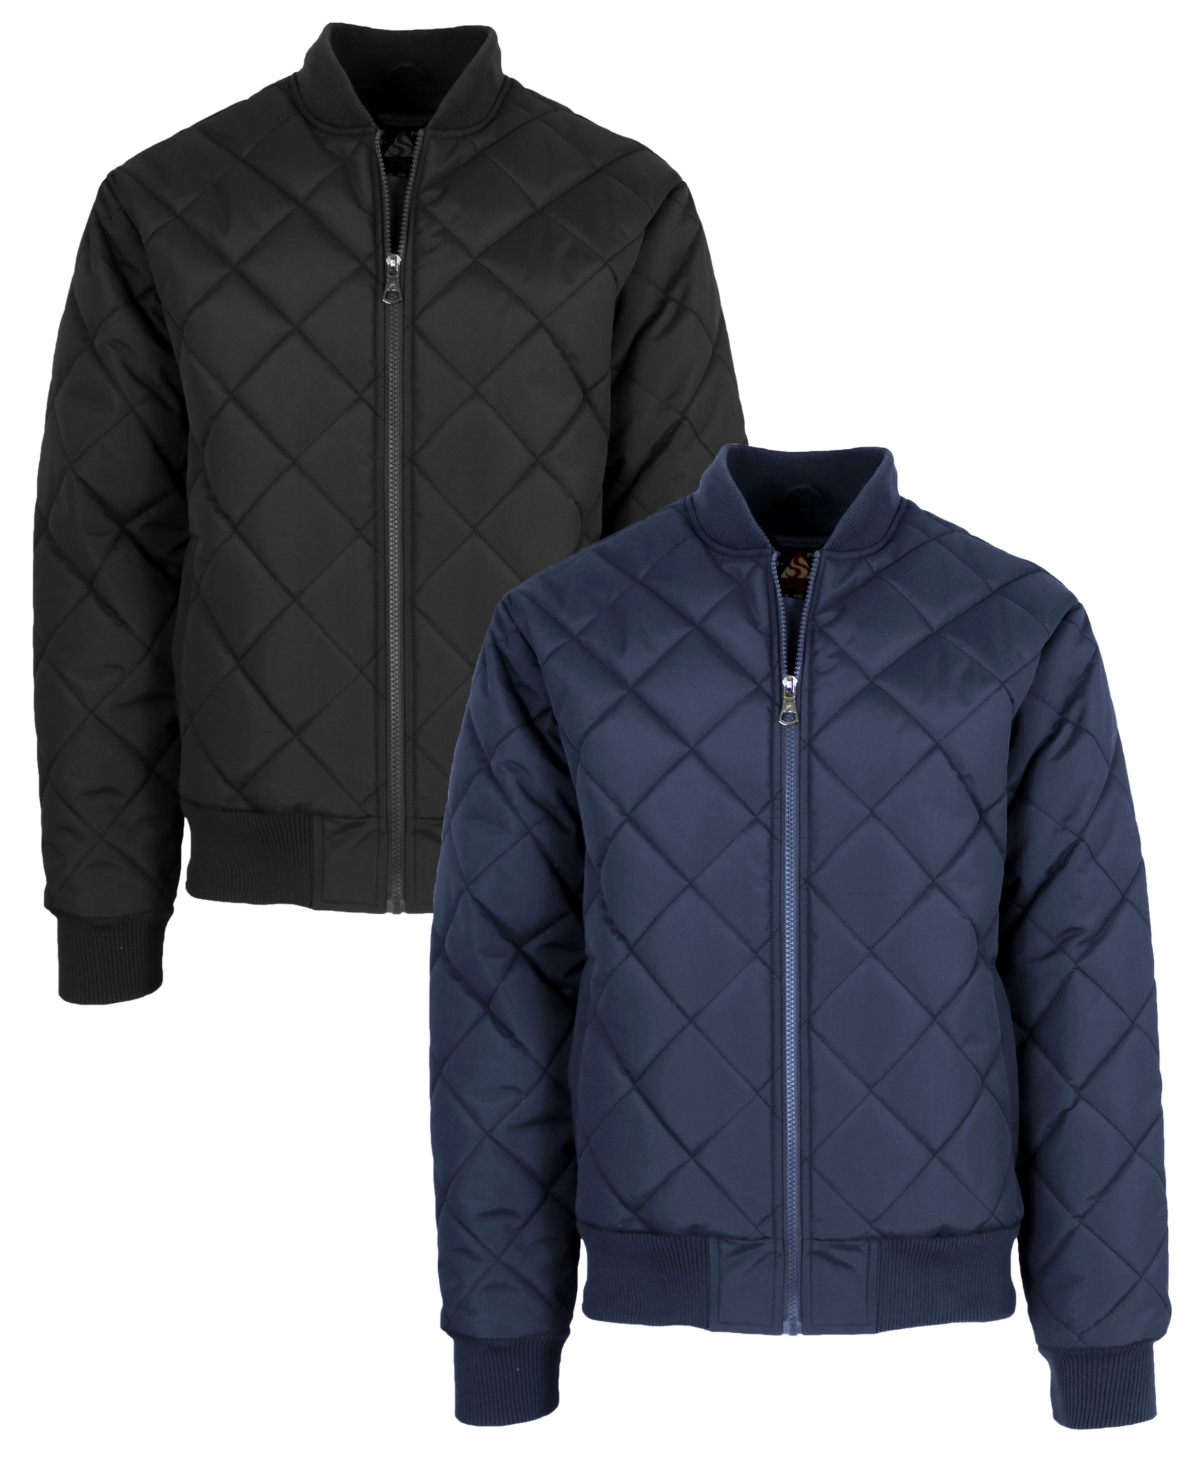 Spire By Galaxy Men's Quilted Bomber Jacket, Pack Of 2 In Black-navy